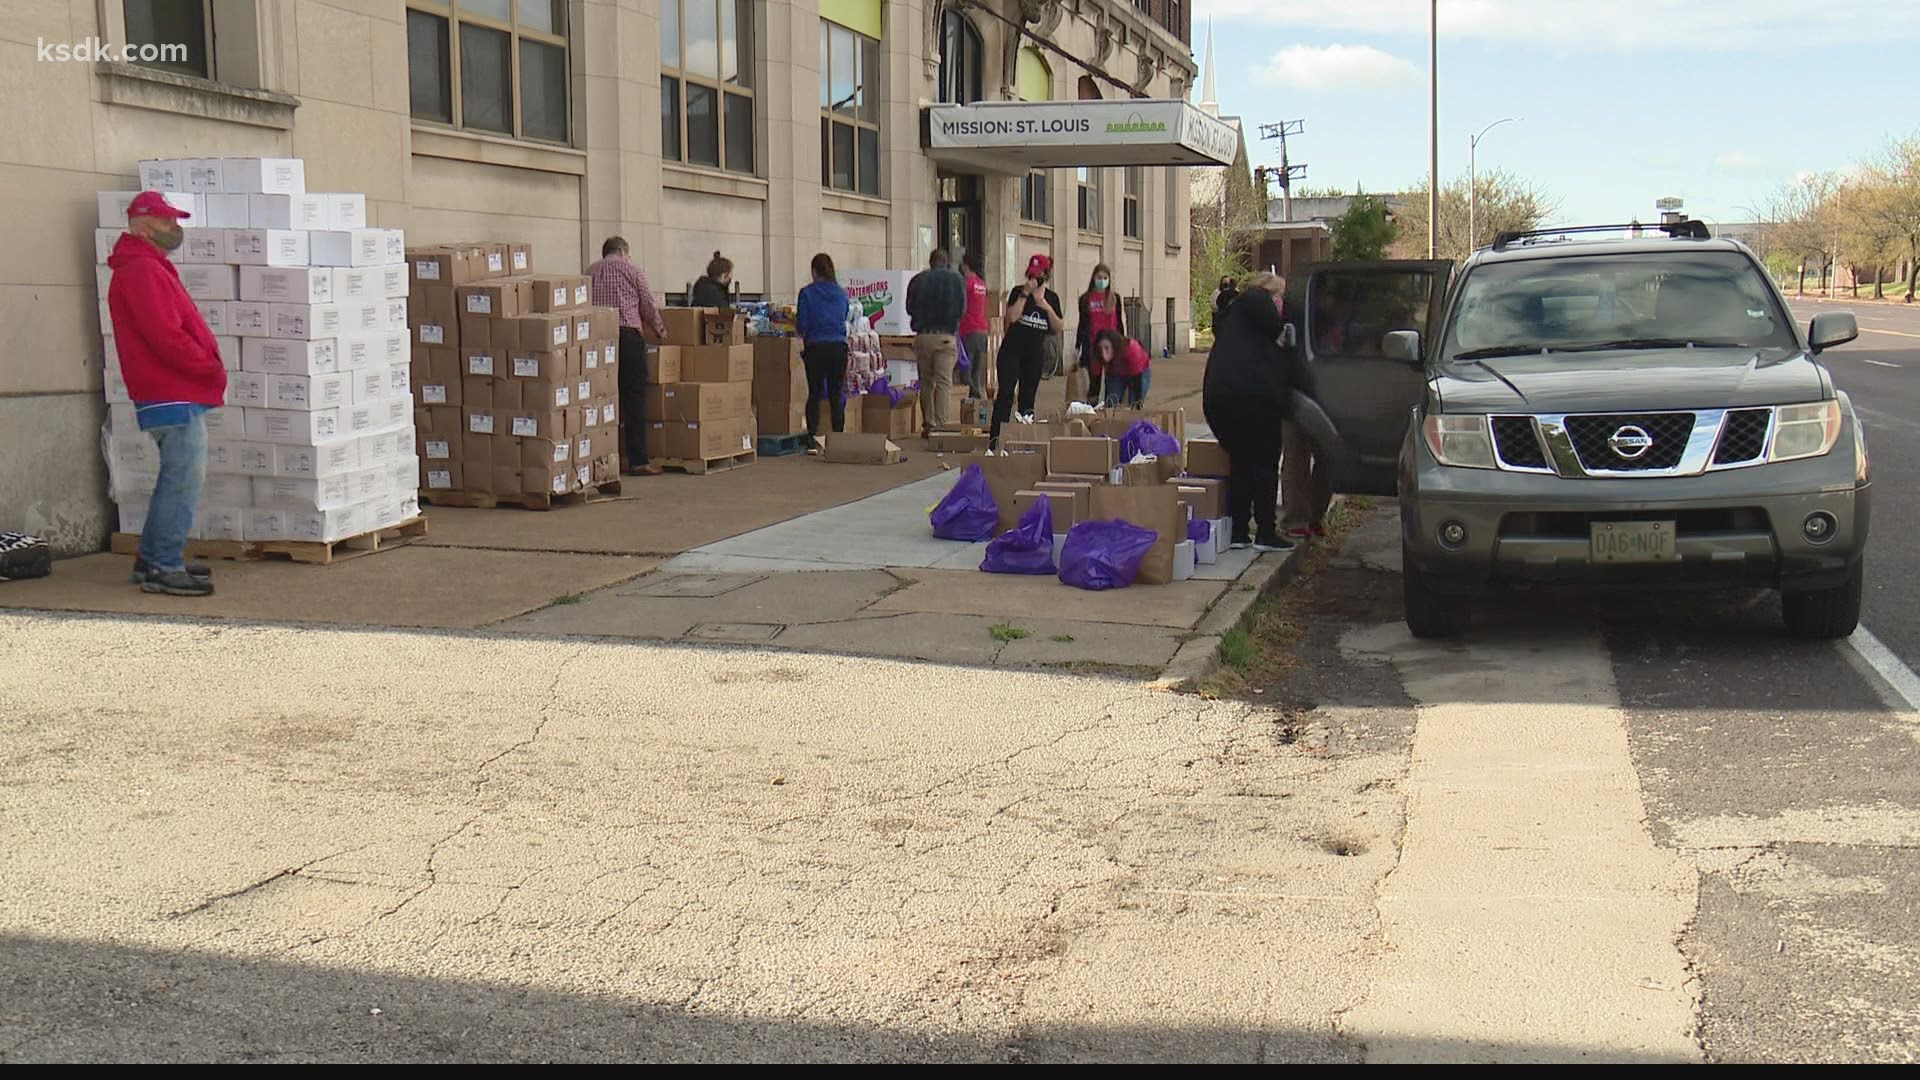 They partnered with the St. Louis Area Food Bank for ten pop-up food pantries